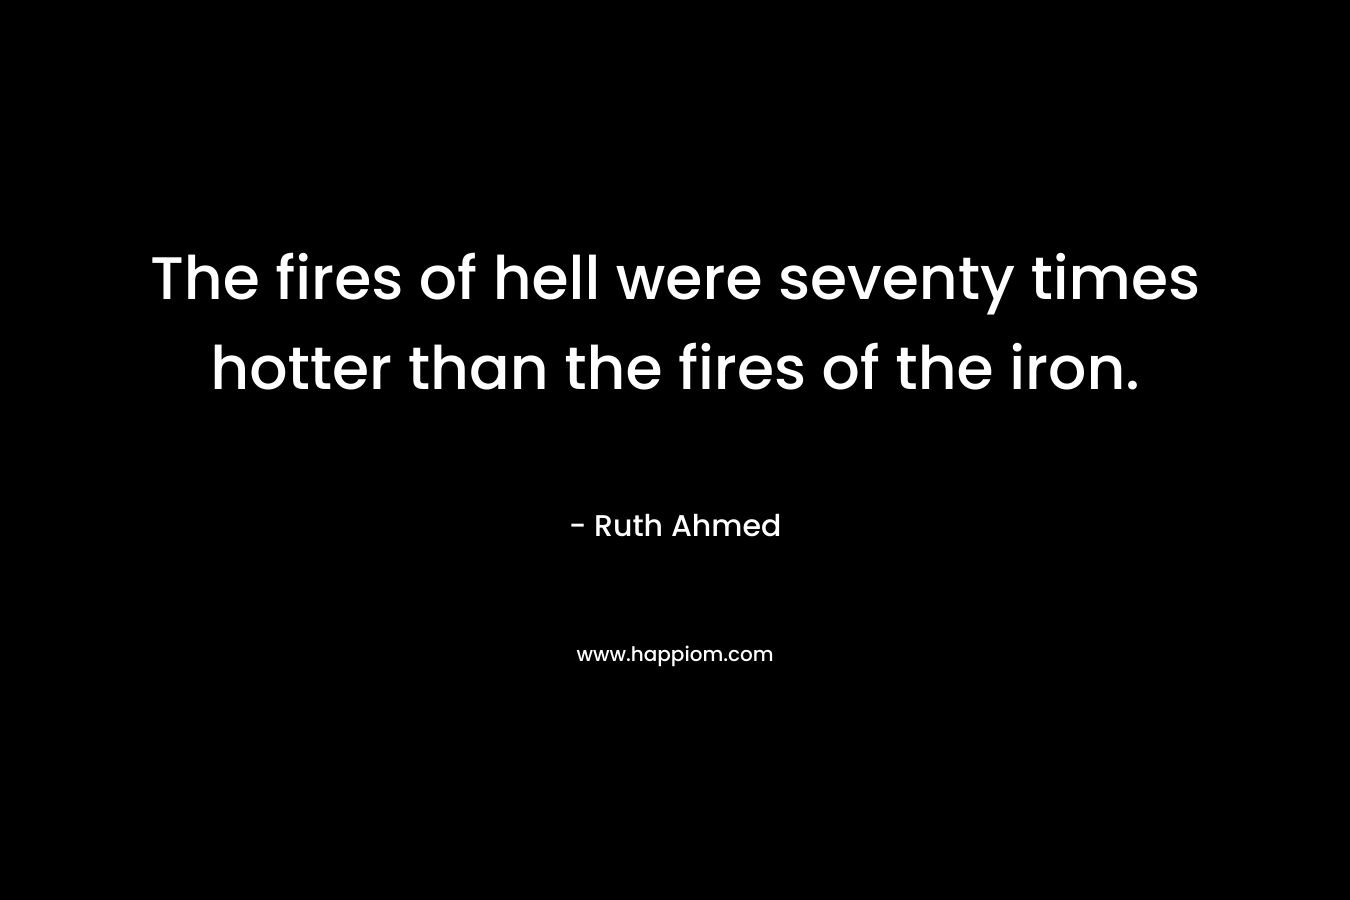 The fires of hell were seventy times hotter than the fires of the iron. – Ruth Ahmed